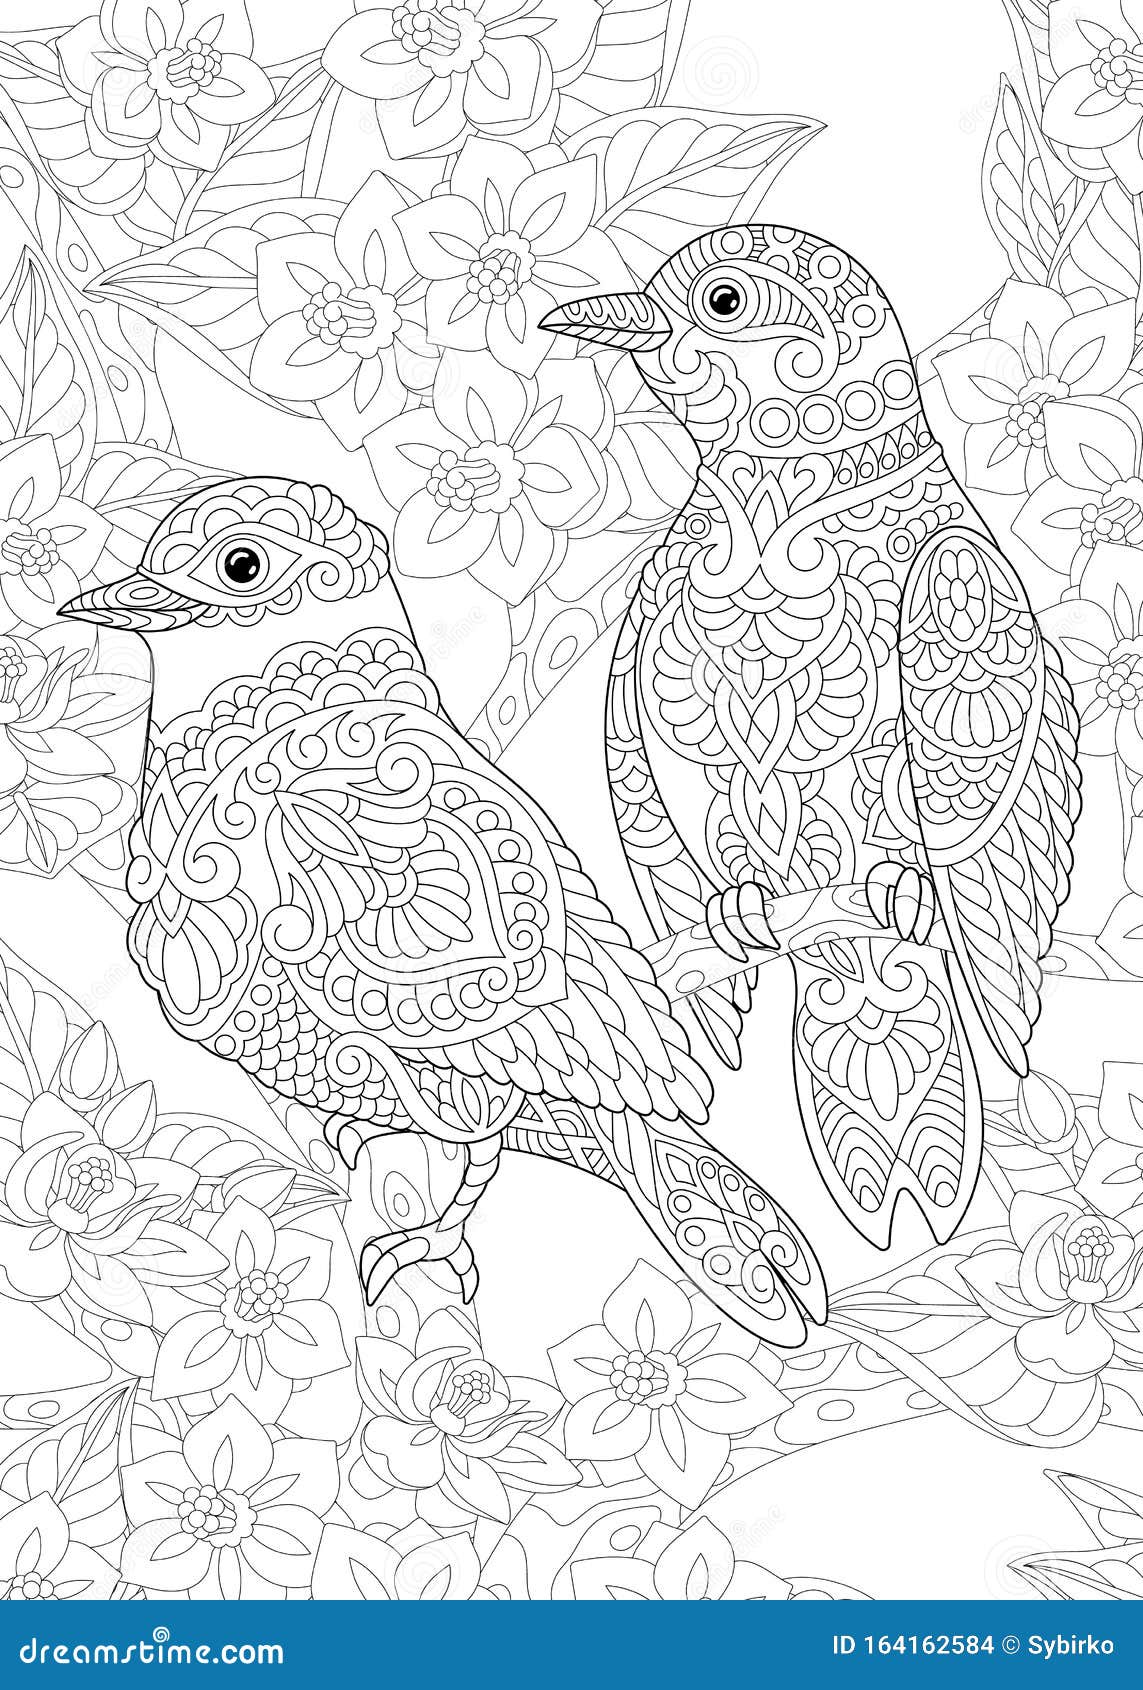 Adult Colouring Bird Stock Illustrations – 21 Adult Colouring ...